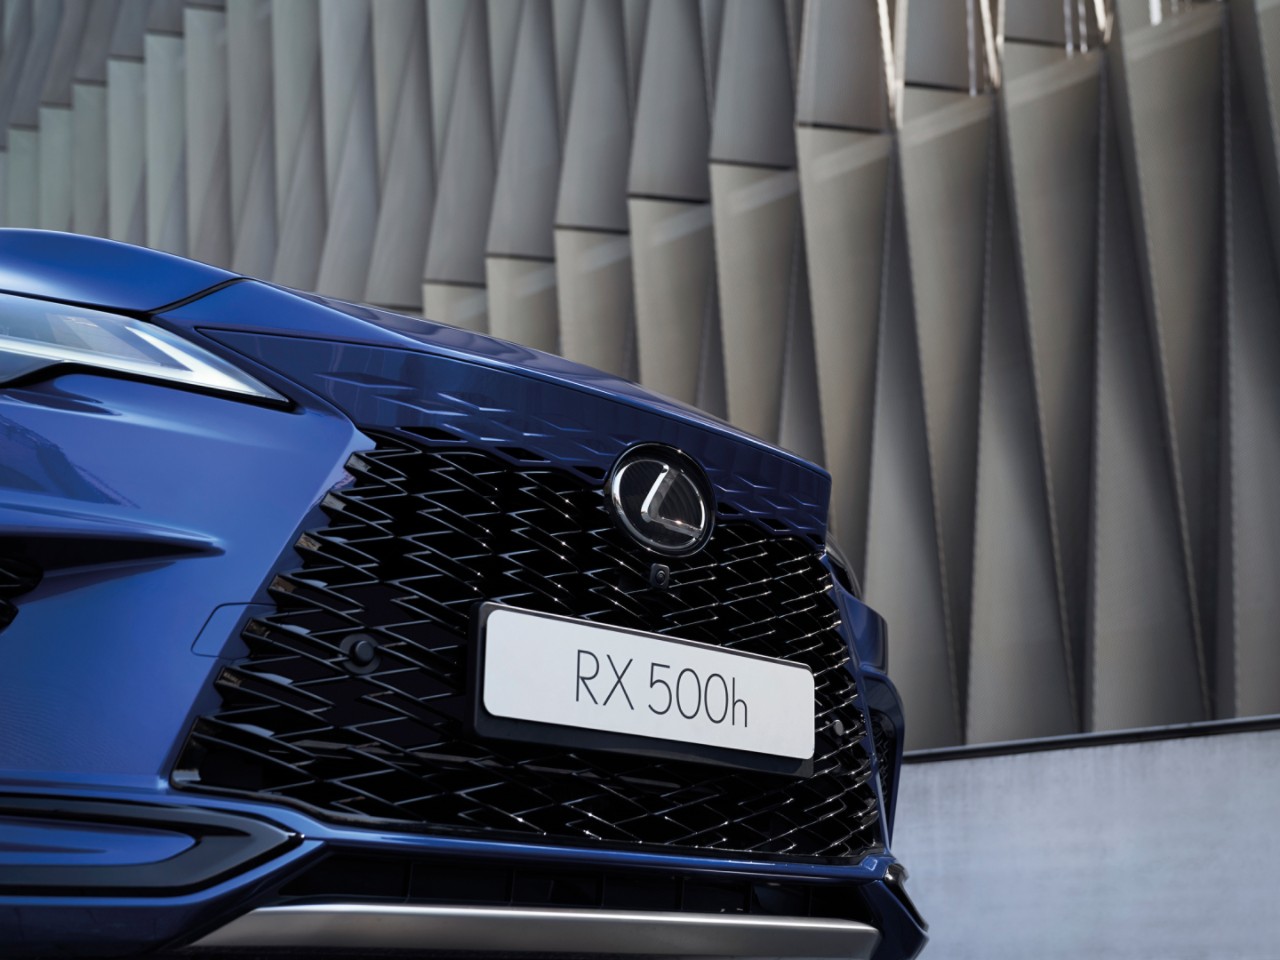 Lexus RX 500h signiture bumper and grille